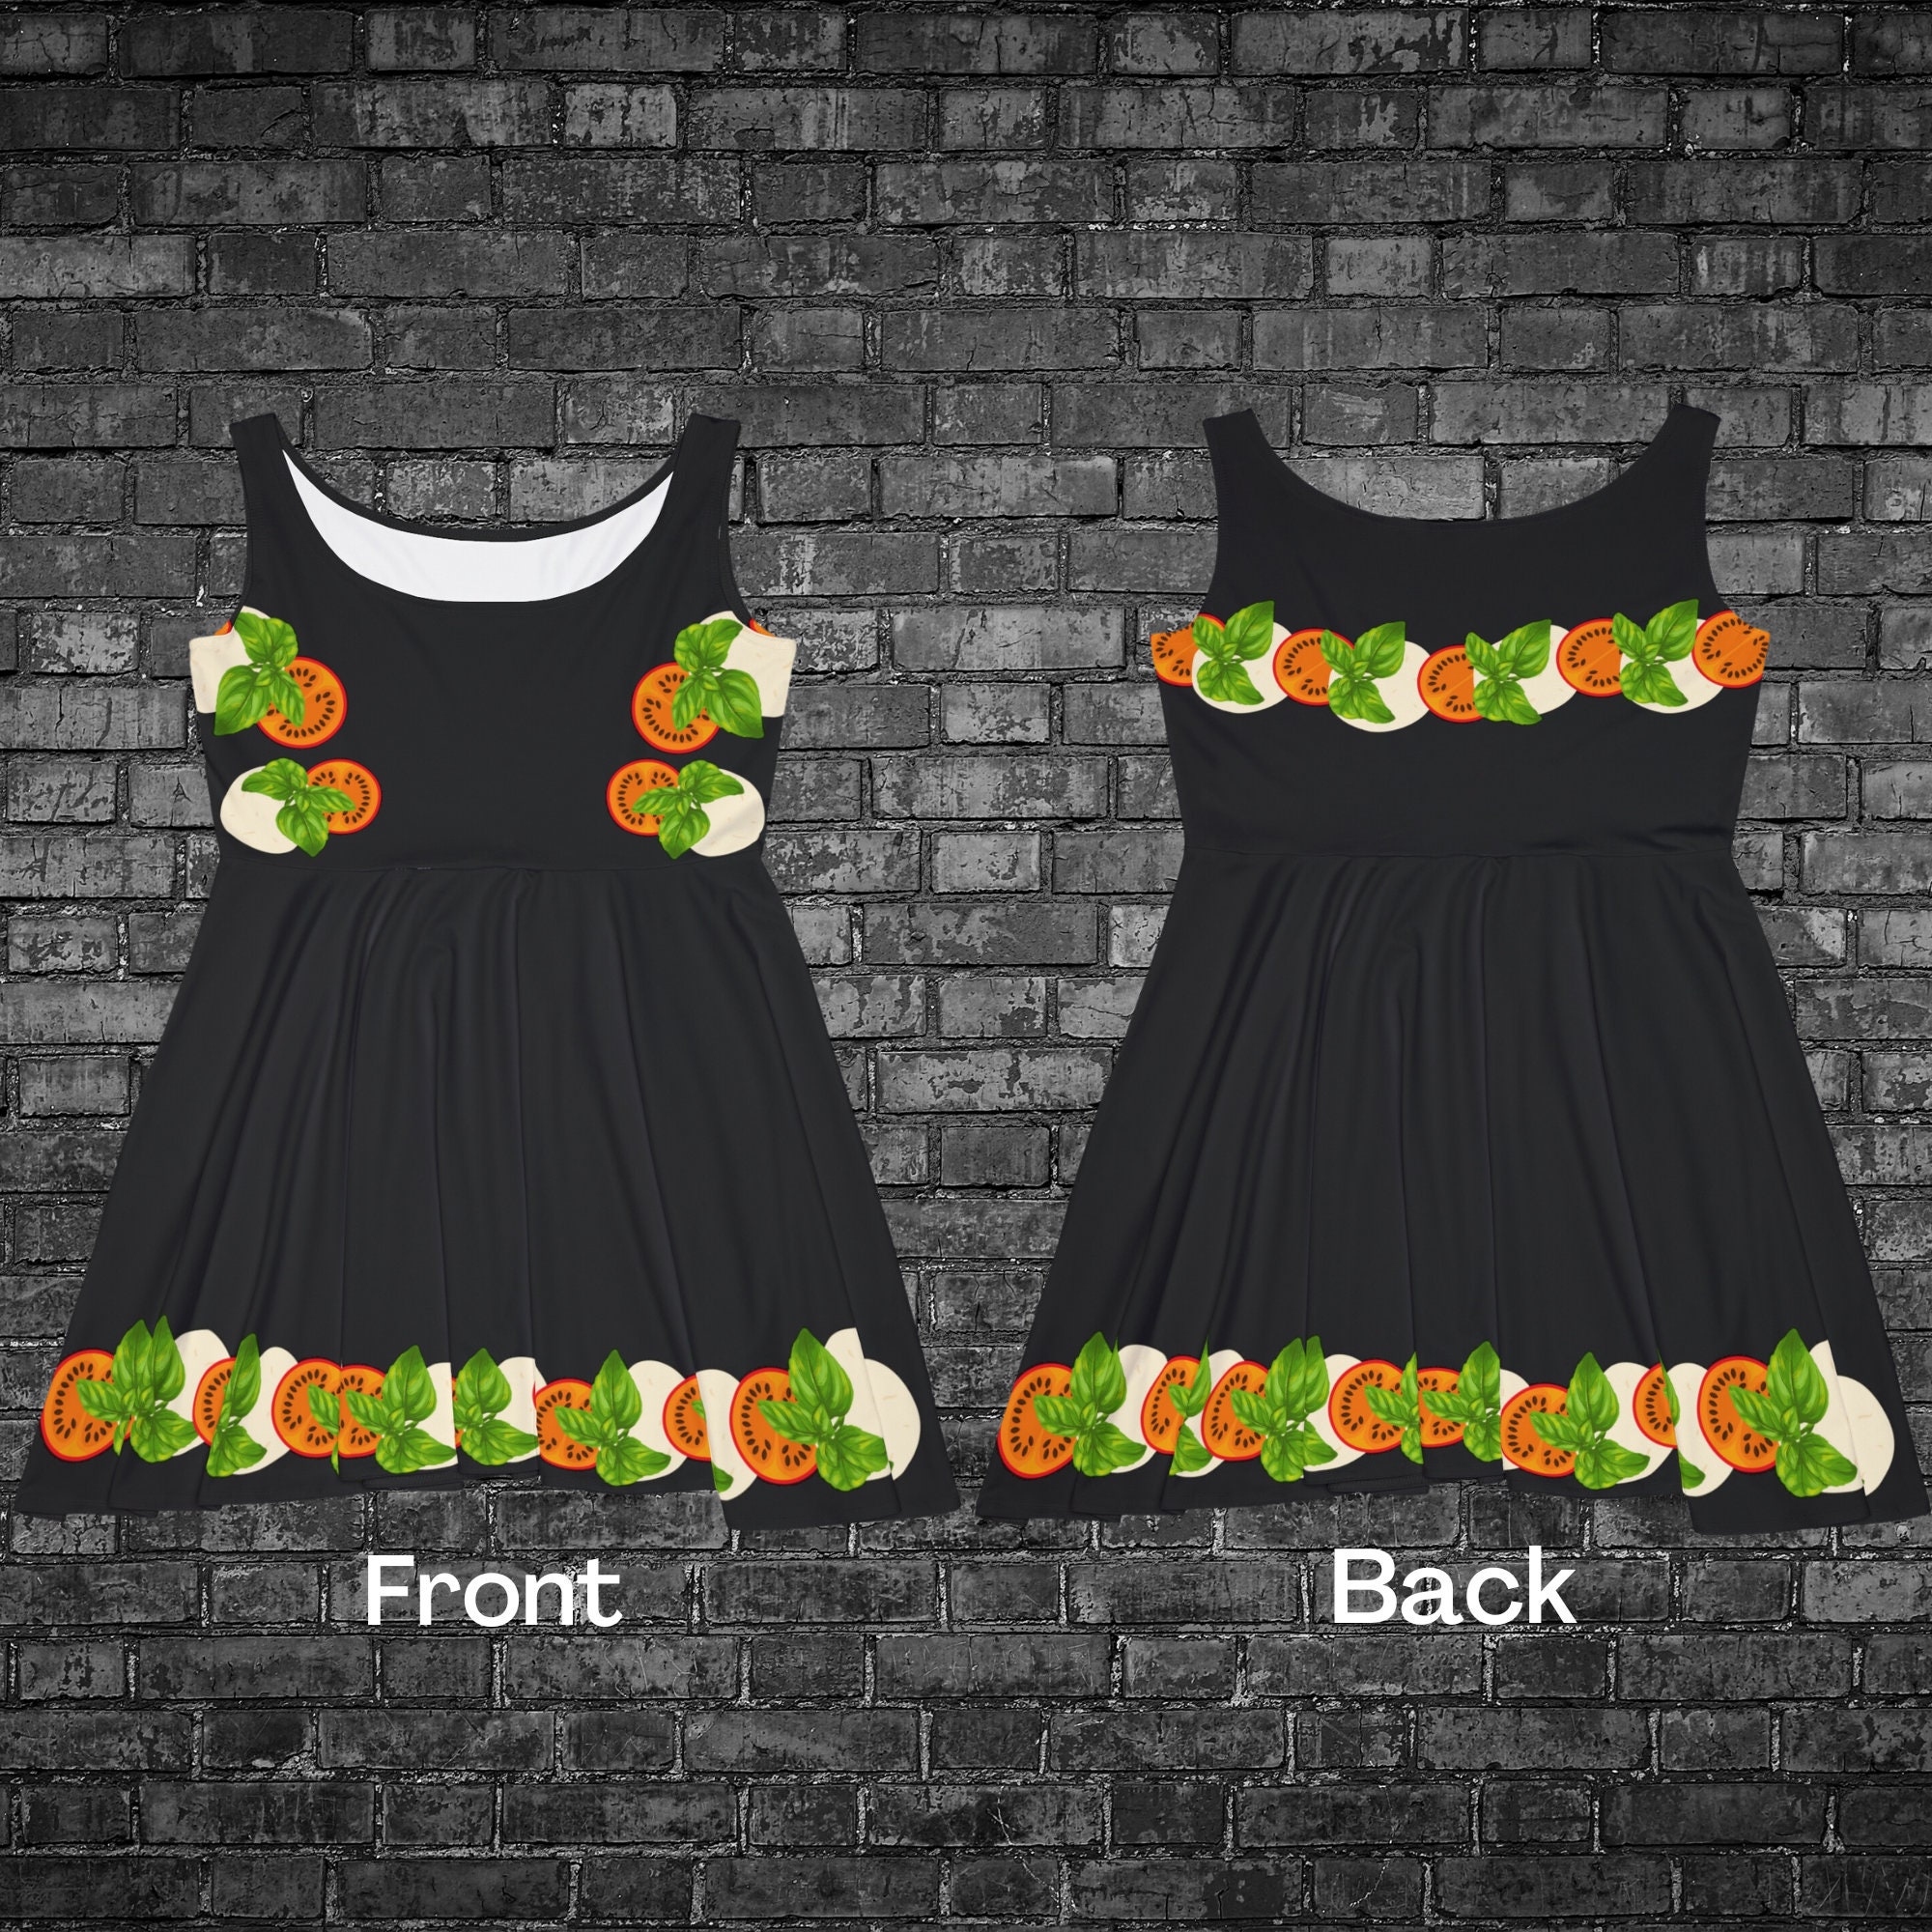 Food Inspired Clothing: Tasty Italian Caprese Salad Dress L Fun and Flirty  Summer Outfit L Perfect for Foodies. -  Denmark